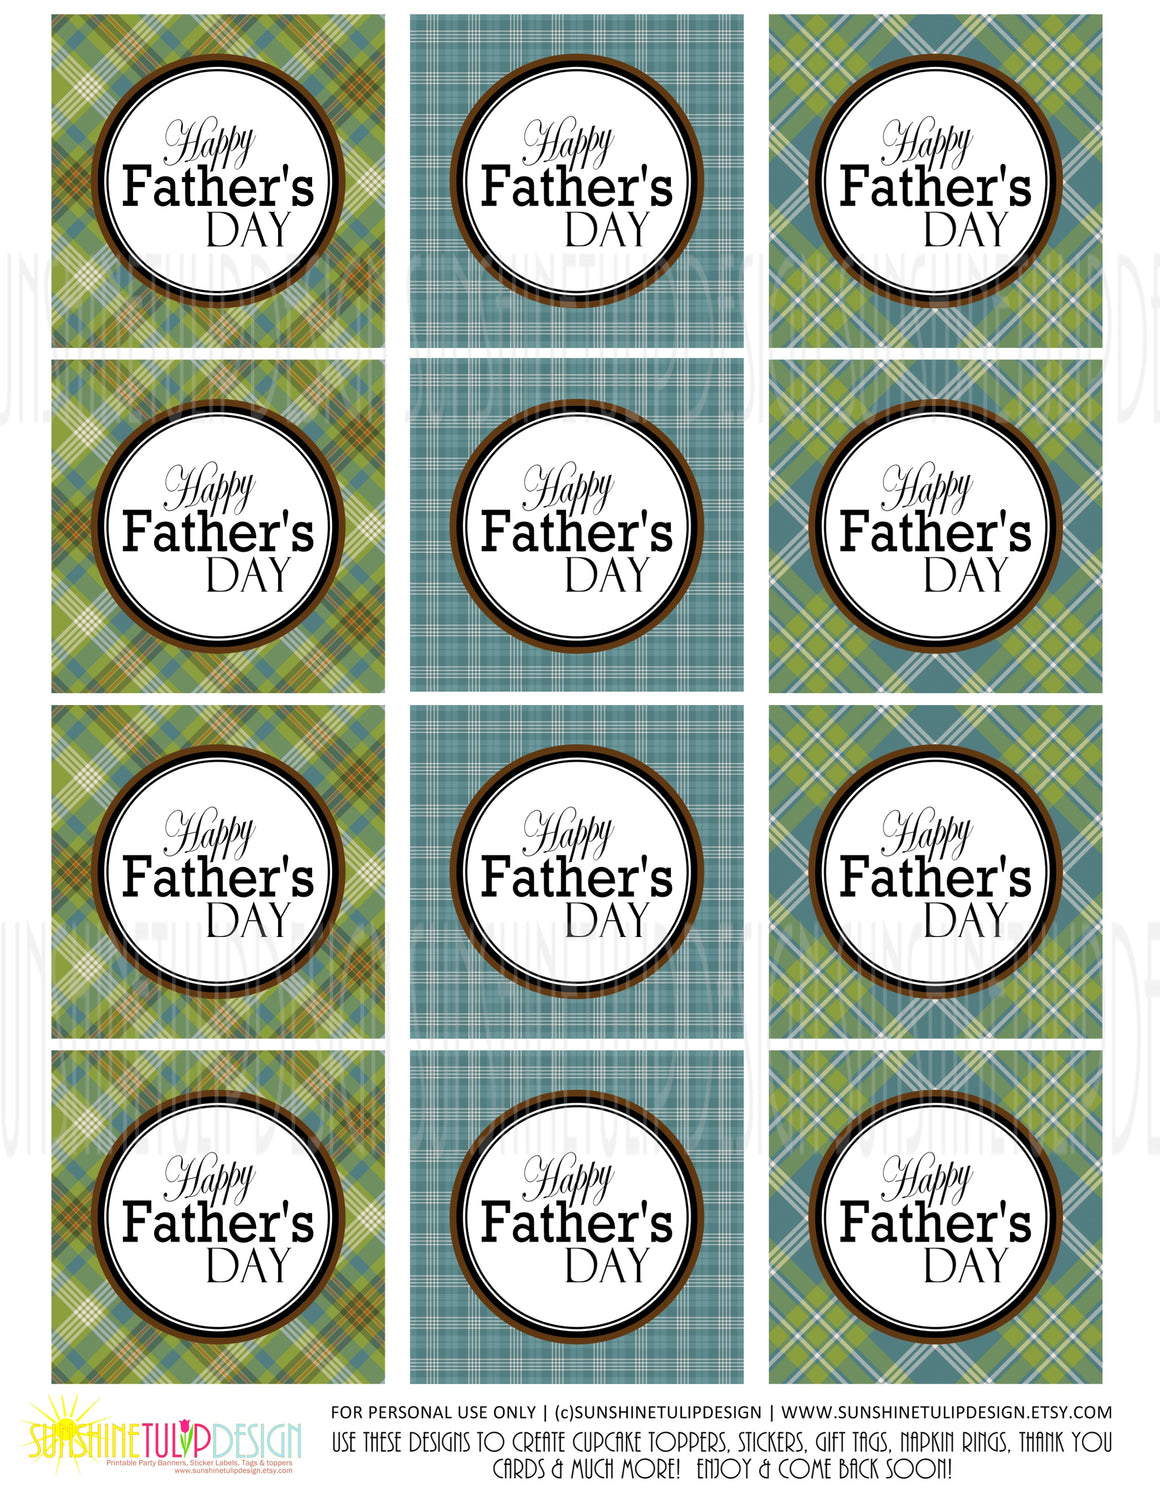 Printable Fathers Day Gift Tags, Printable Plaid Happy Father's Day Cupcake Toppers by SUNSHINETULIPDESIGN